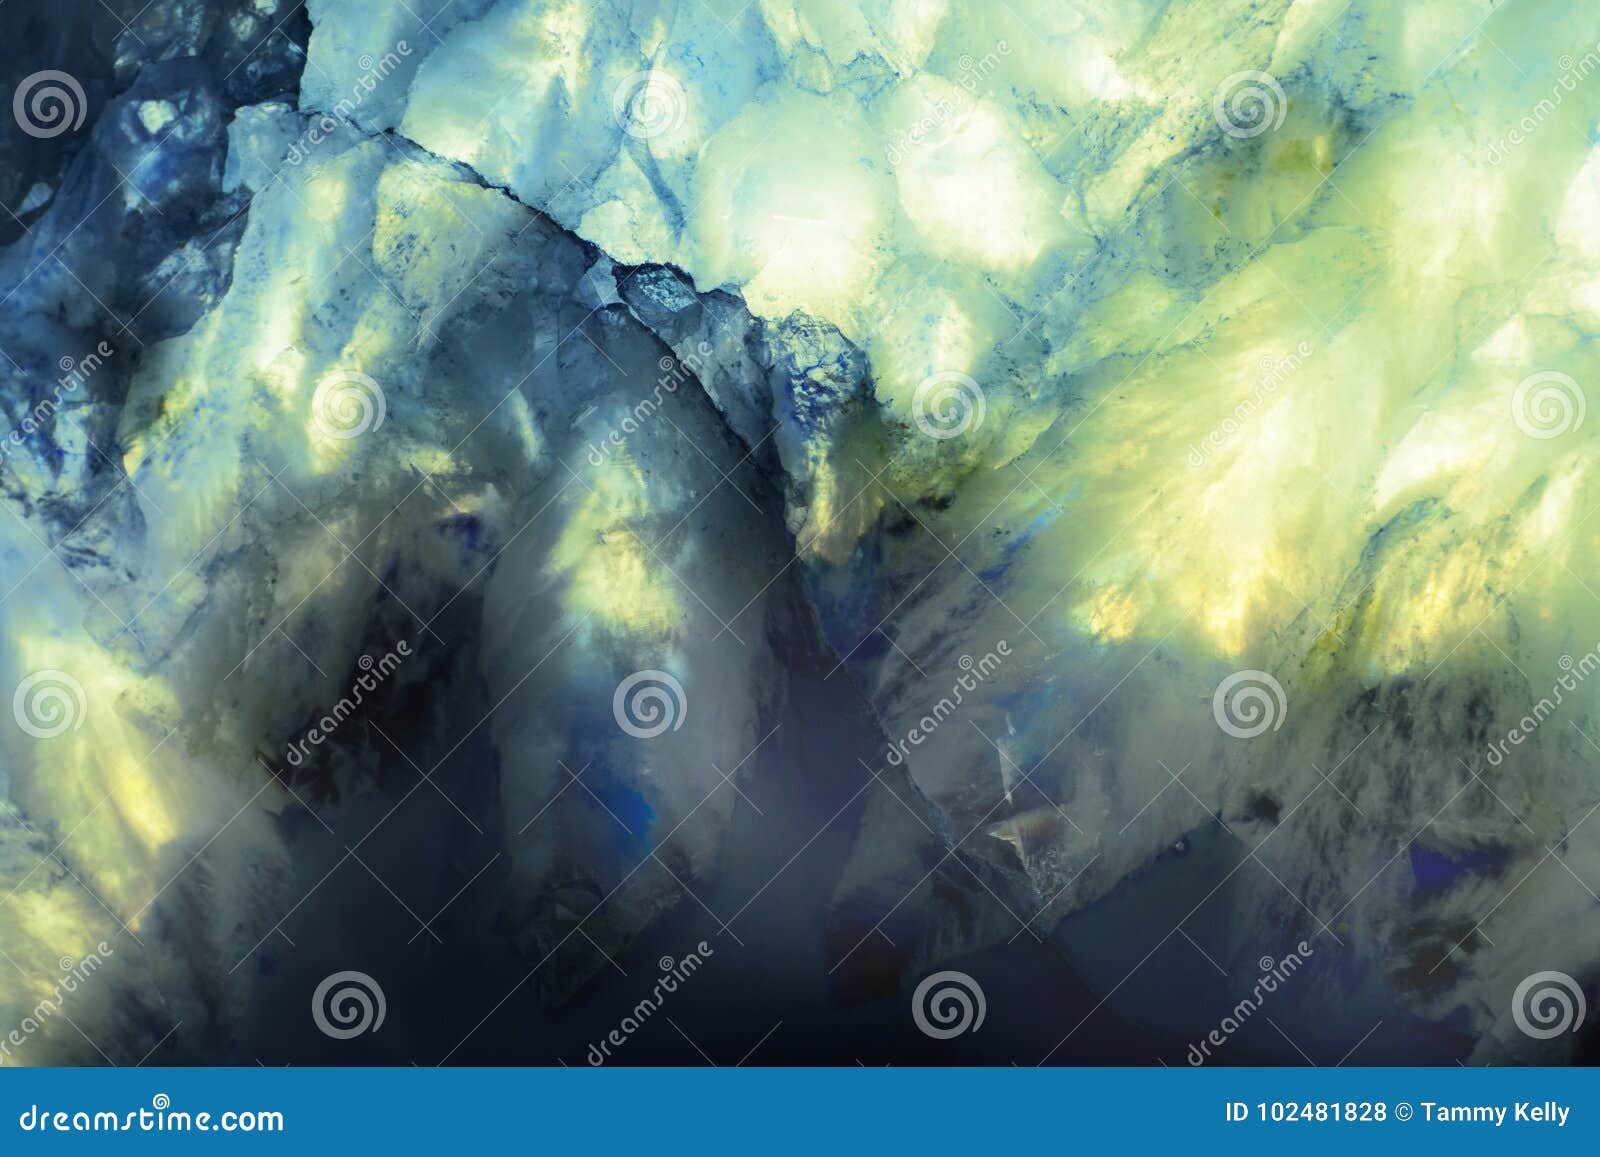 extreme macro photo of blue and green agate rocks.